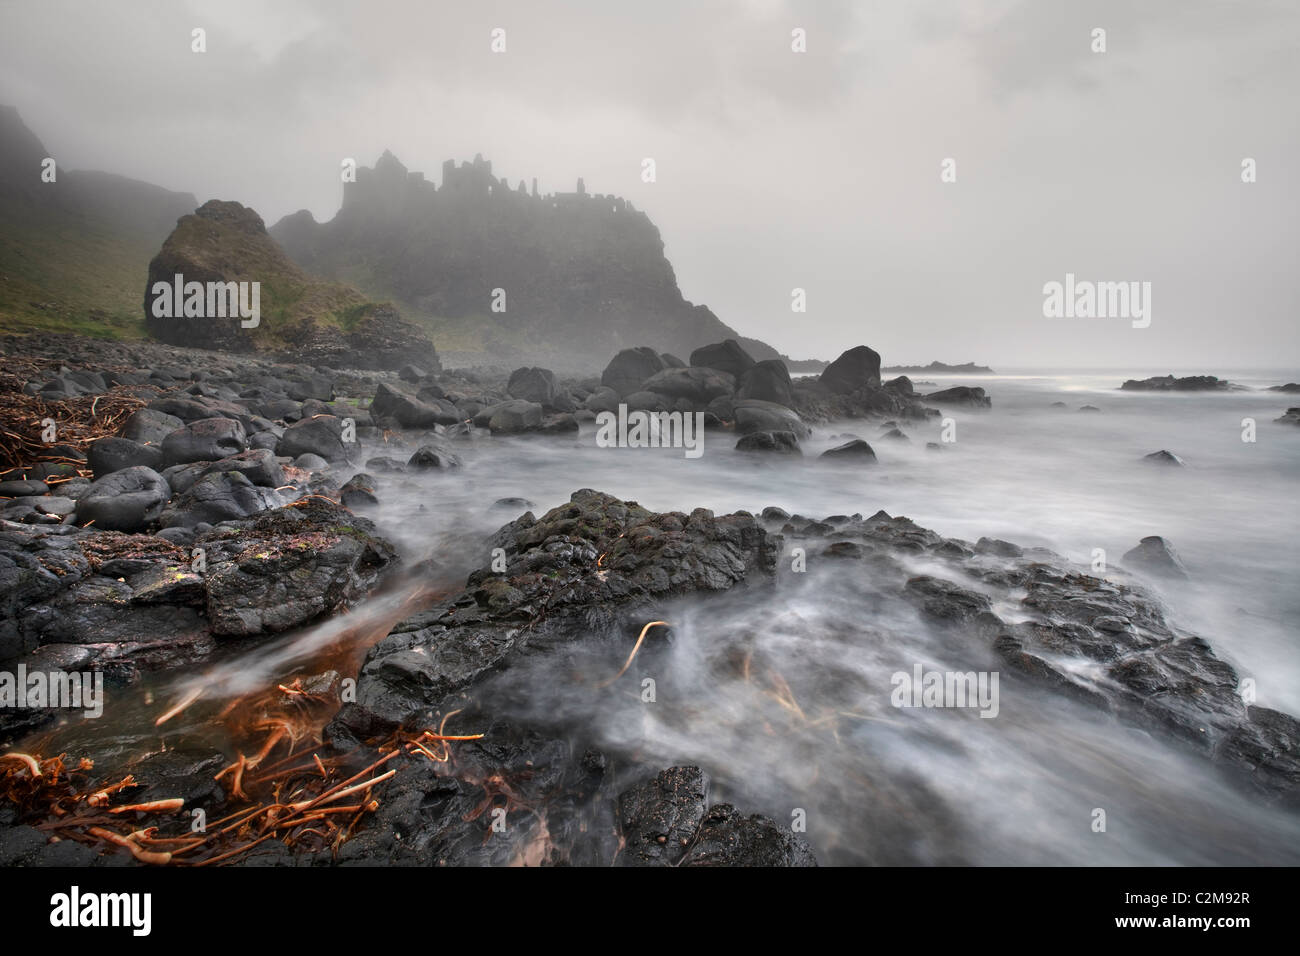 Mist of Time, Dunluce Castle captured in foggy conditions. Stock Photo